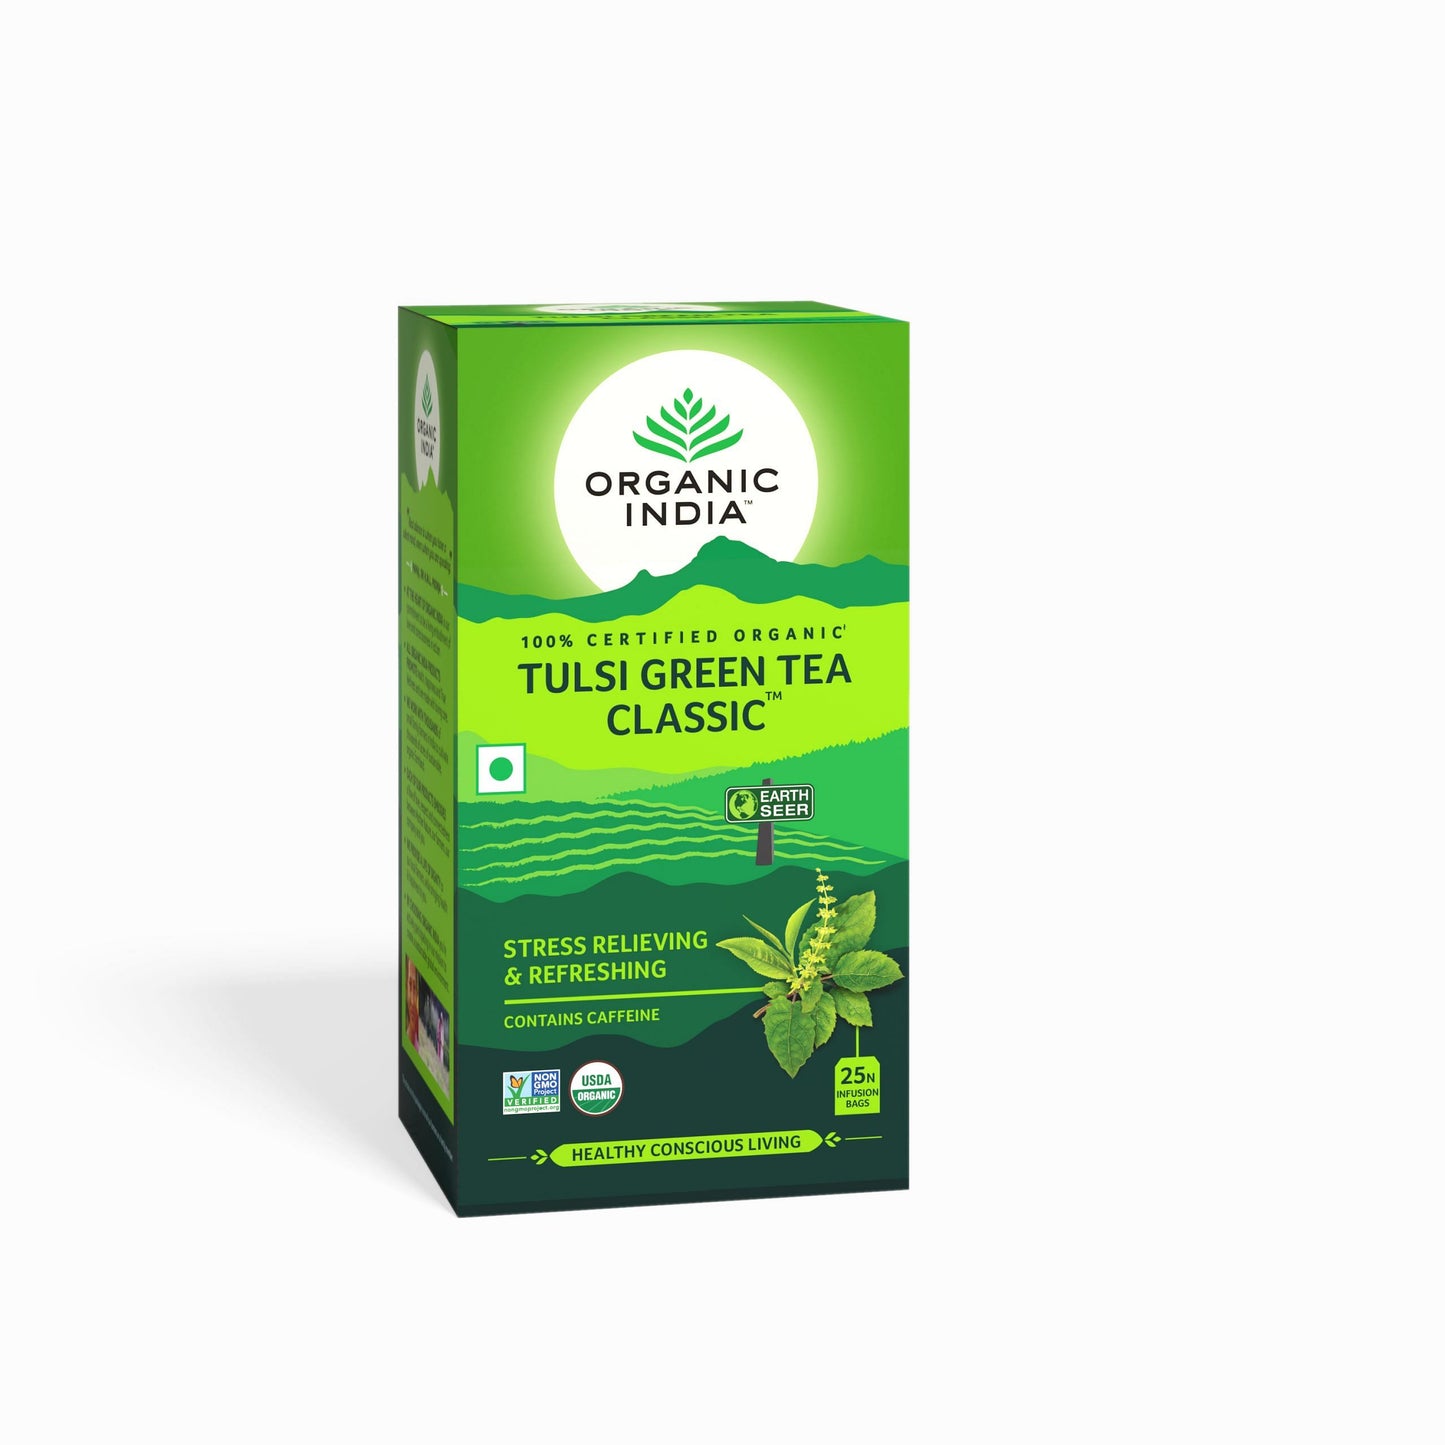 Organic India Tulsi Green Tea Classic 25 Infusion Bags Pack of 2